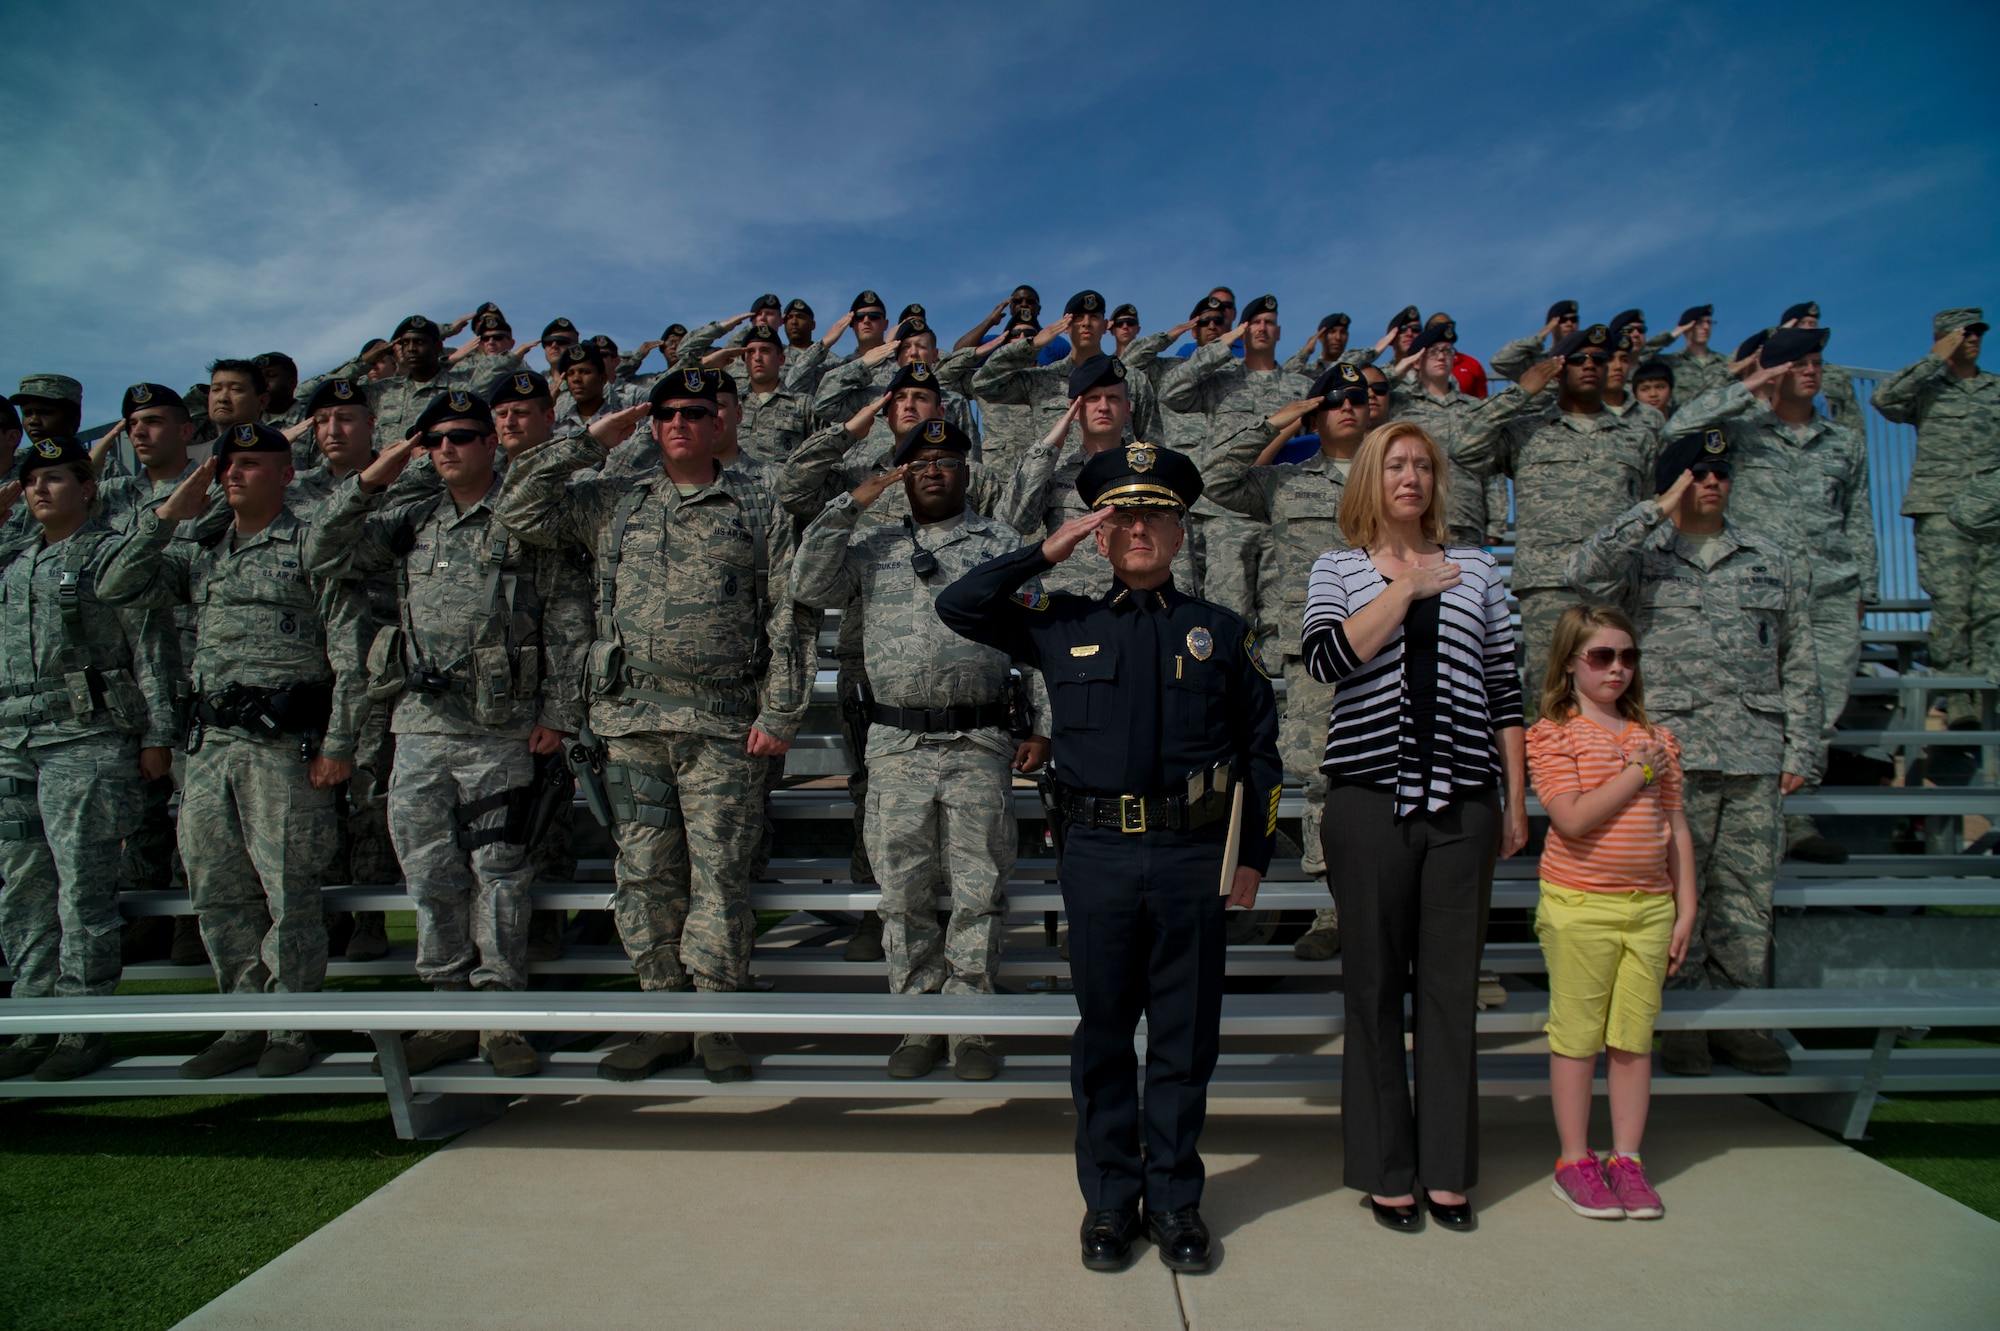 Robert Duncan, Alamogordo chief of police, Susie Galea, Alamogordo mayor, and members of the 49th Security Forces Squadron salute the flag as retreat is played during the Police Week closing ceremony at Holloman Air Force Base, N.M., May 16. According to the National Police Week website, President John F.  Kennedy signed a proclamation in 1962 that designated May 15 as Peace Officers Memorial Day and the week in which that date falls as National Police Week. Since the inception of National Police Week, the United States Air Force has lost 120 military and civilian law enforcement officers. (U.S. Air Force photo by Airman 1st Class Aaron Montoya / Released)